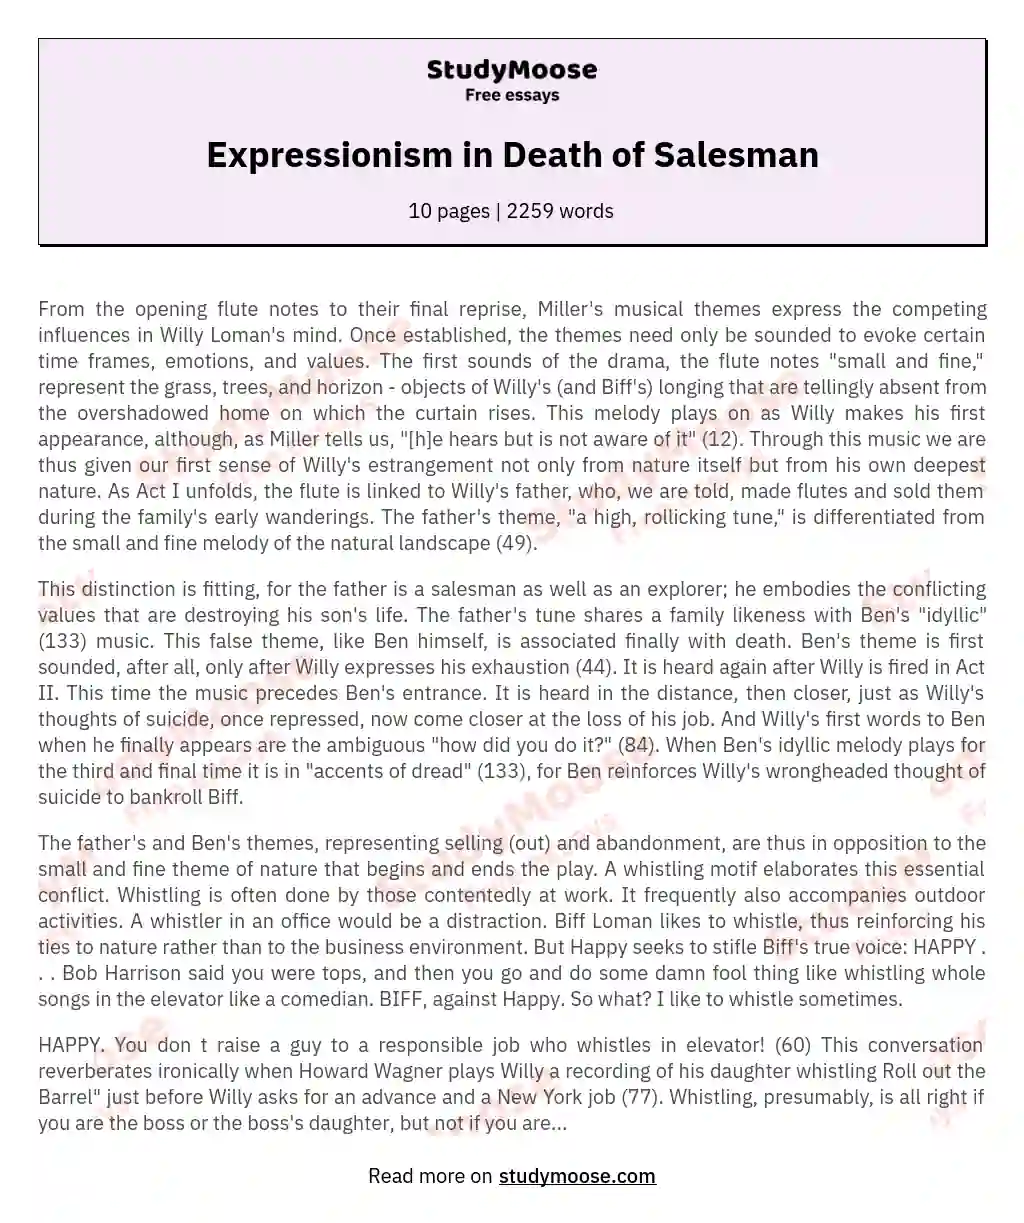 Expressionism in Death of Salesman essay